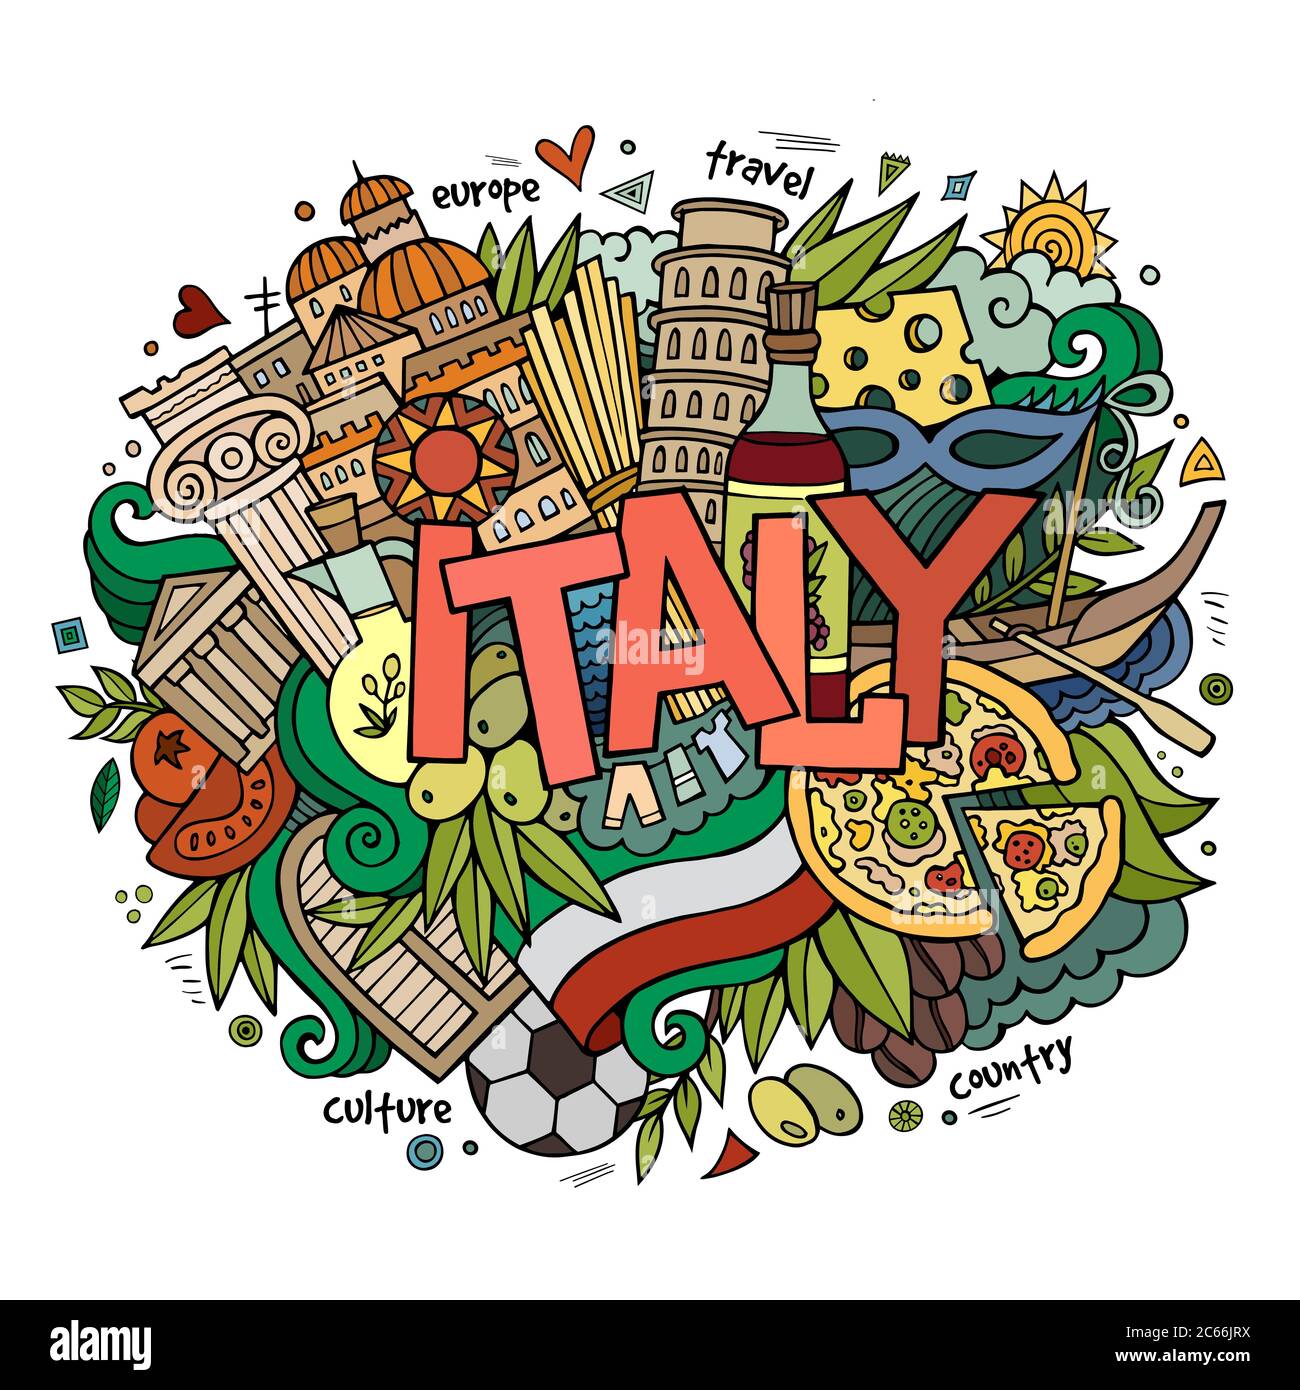 Italy hand lettering and doodles elements background Stock Vector